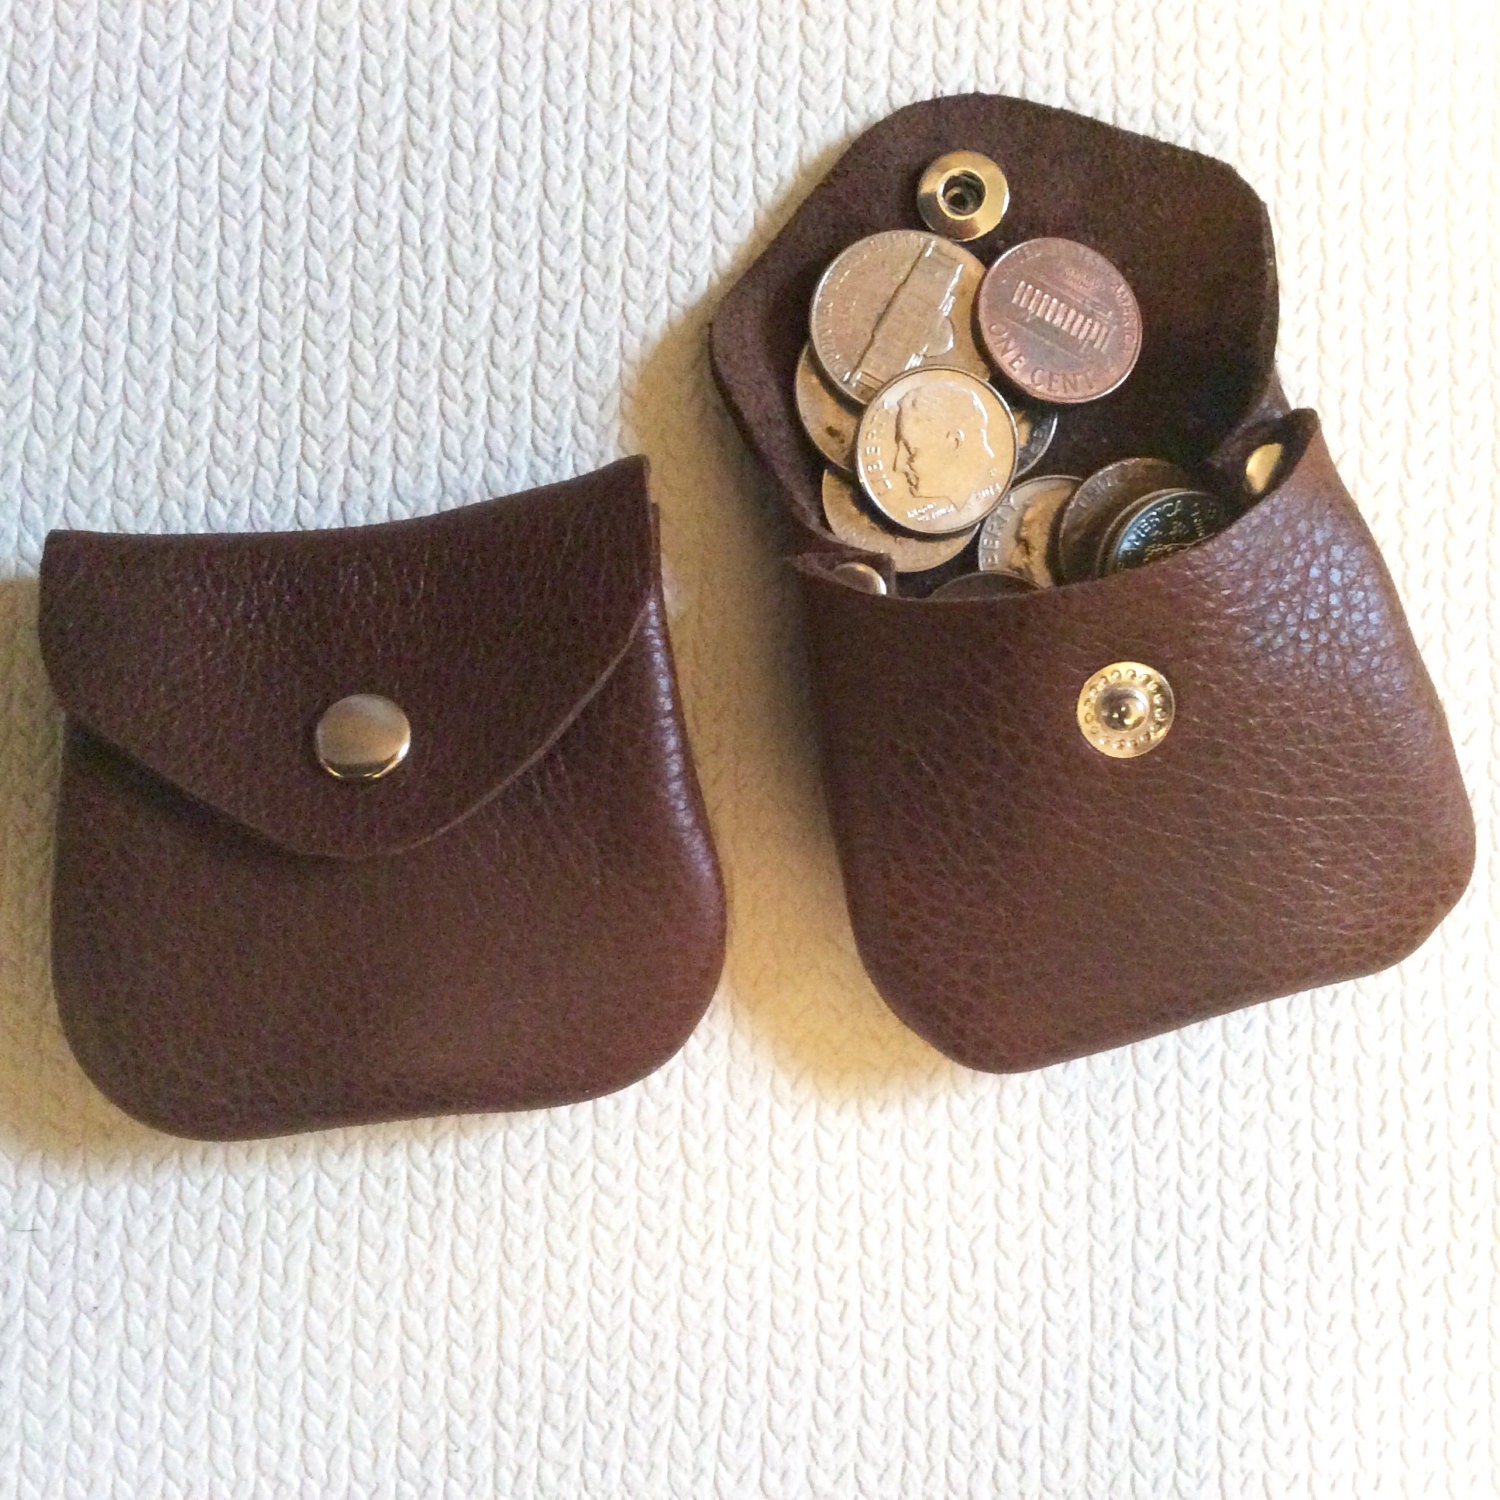 tiny coin purse small coin purse brown coin purse leather